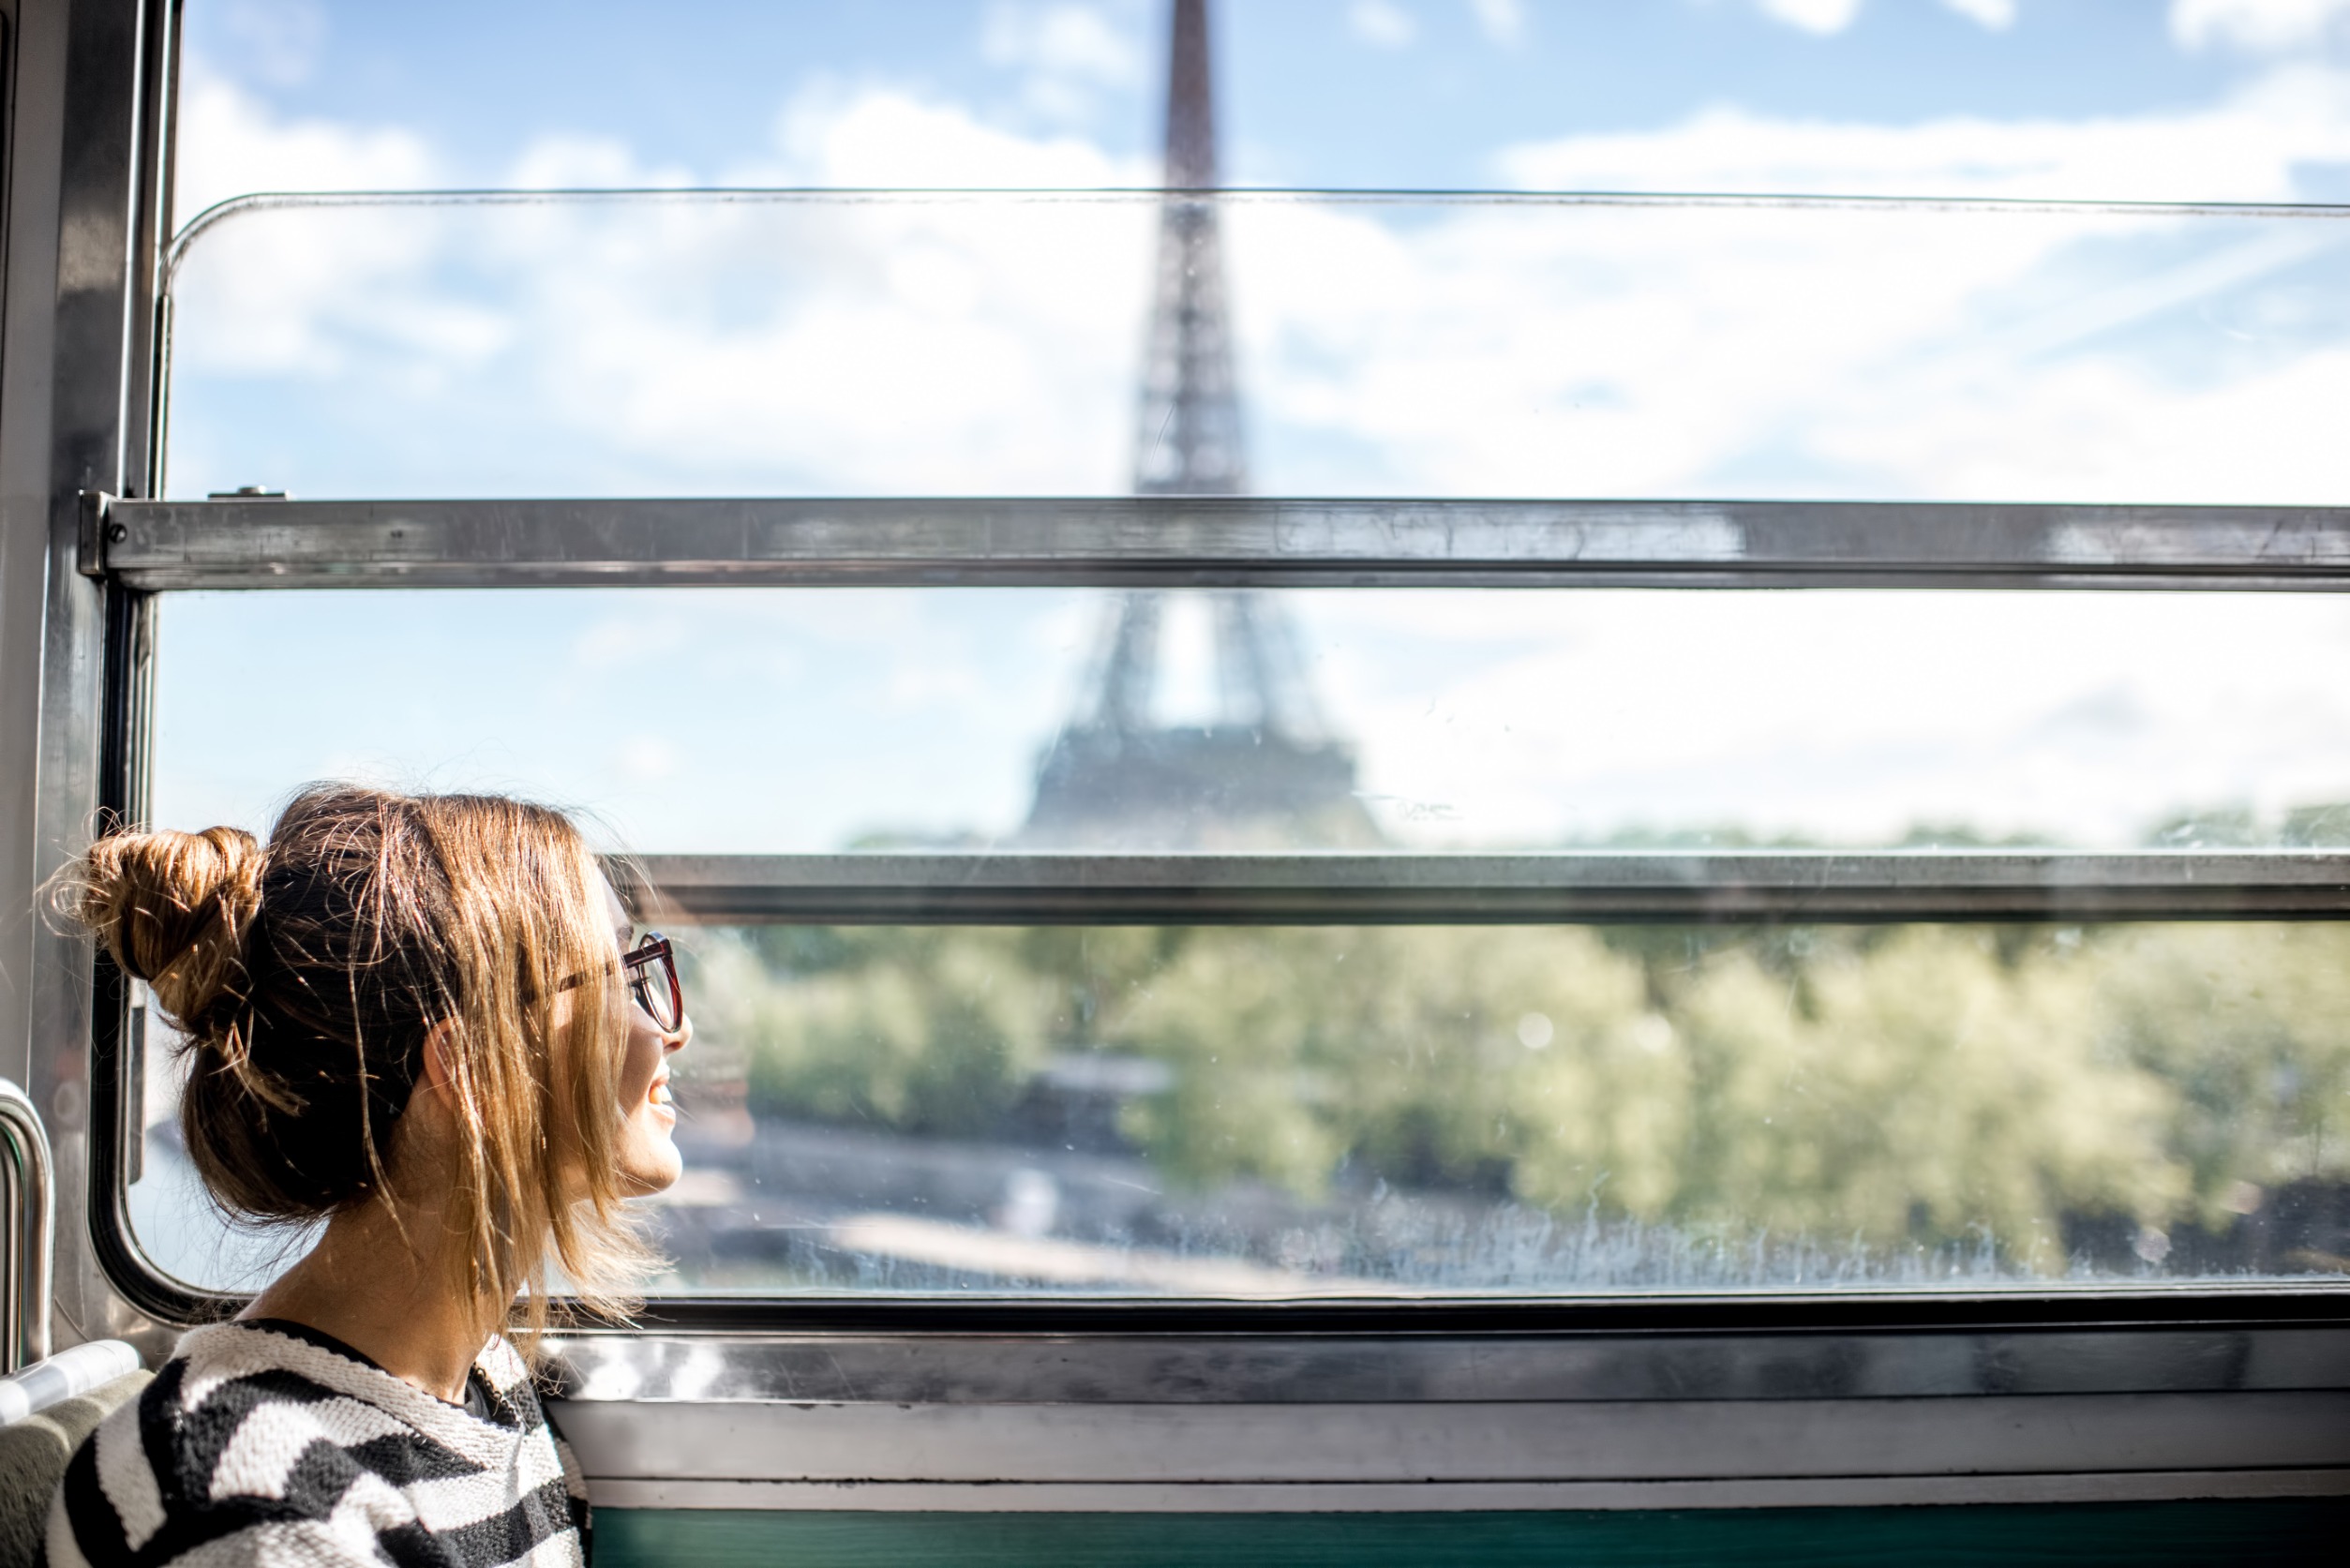 A woman smiles on the train in Paris where she uses the skills gained at one of the Fully Funded Master's Programs in French and Francophone Studies.